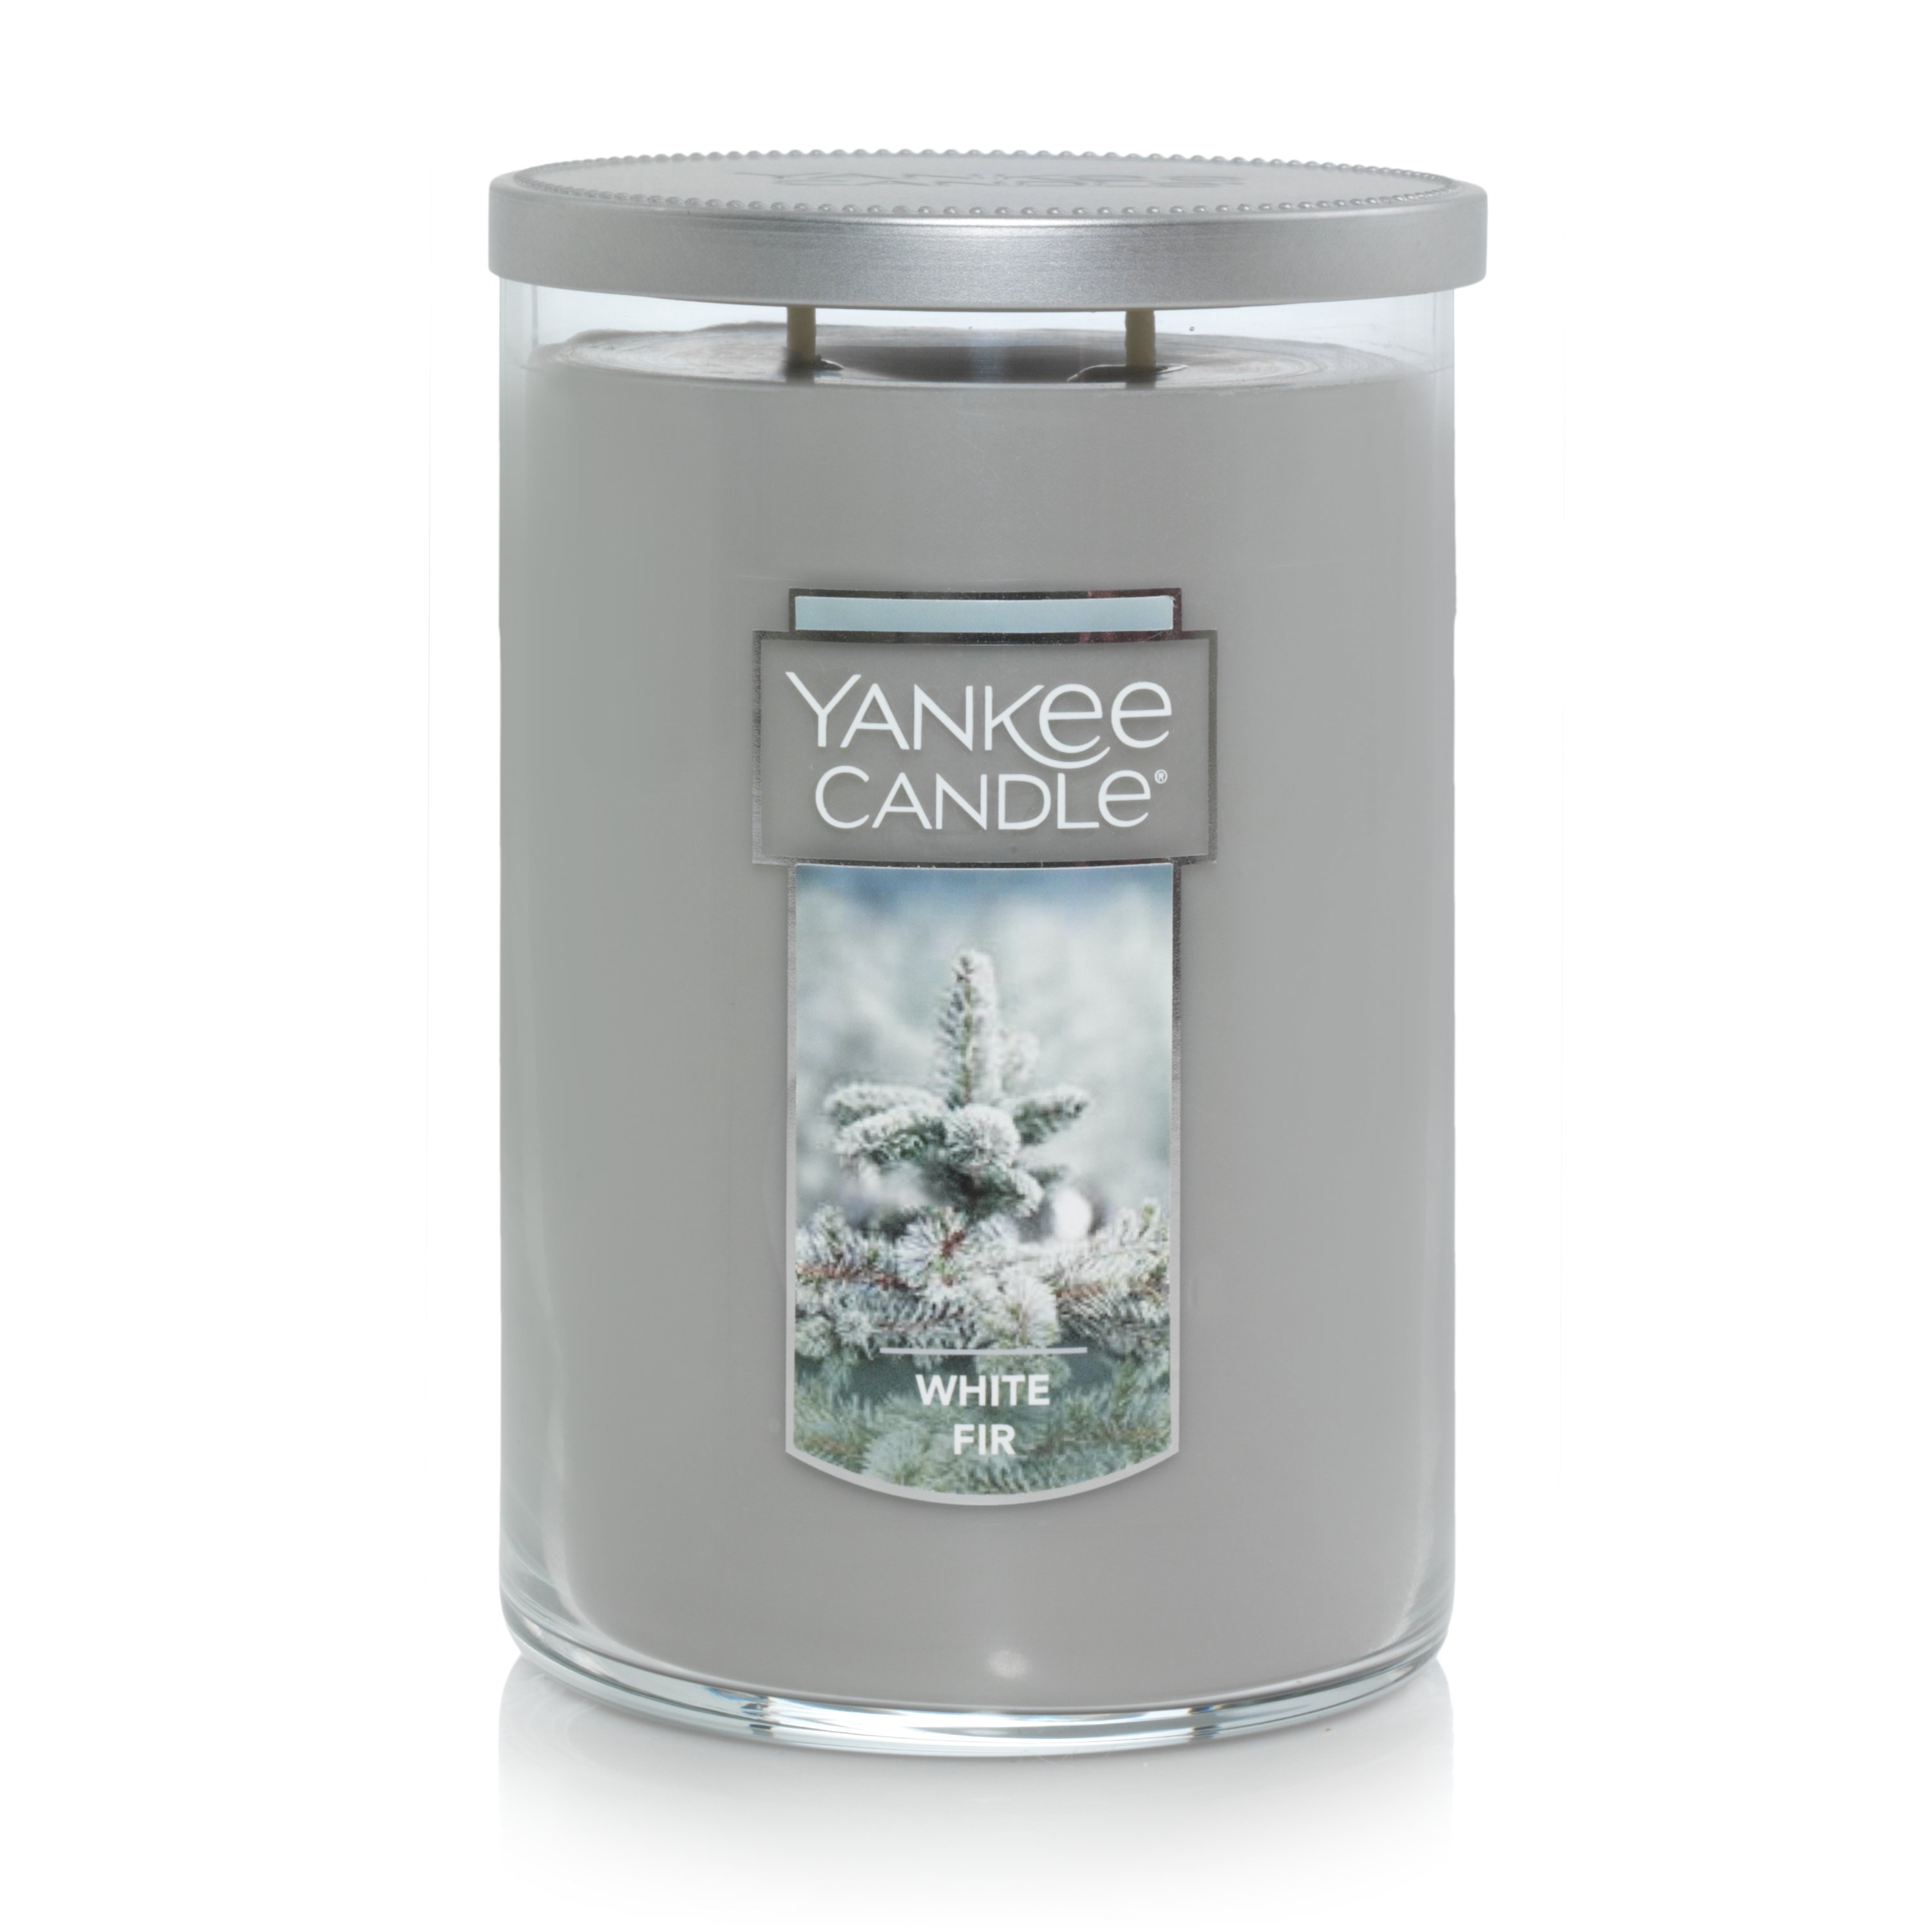 Balsam & Clove Yankee Candle Large 2-Wick Tumbler Candle 